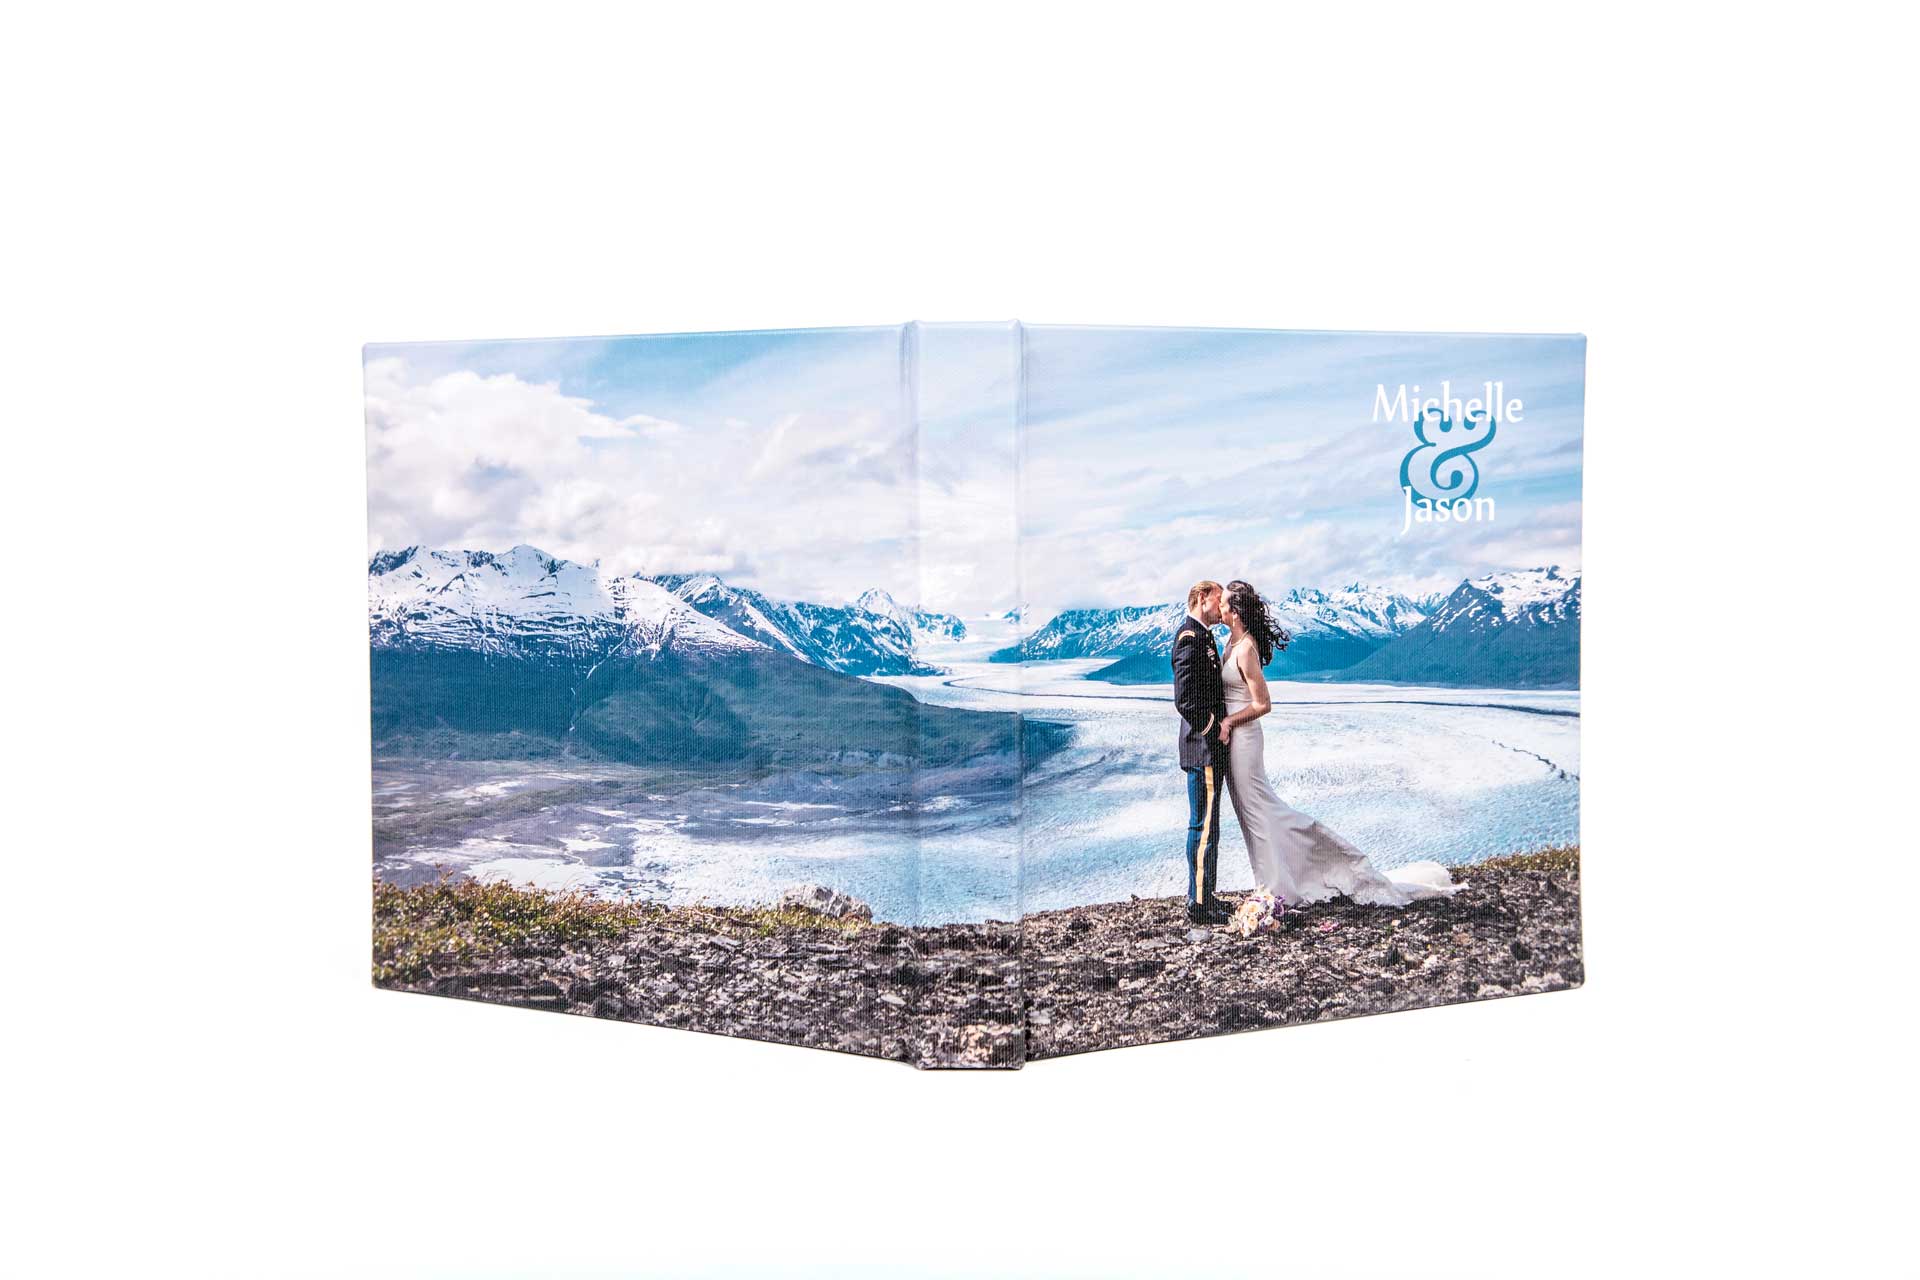 This beautiful panoramic image looks like a piece of artwork on canvas cover!